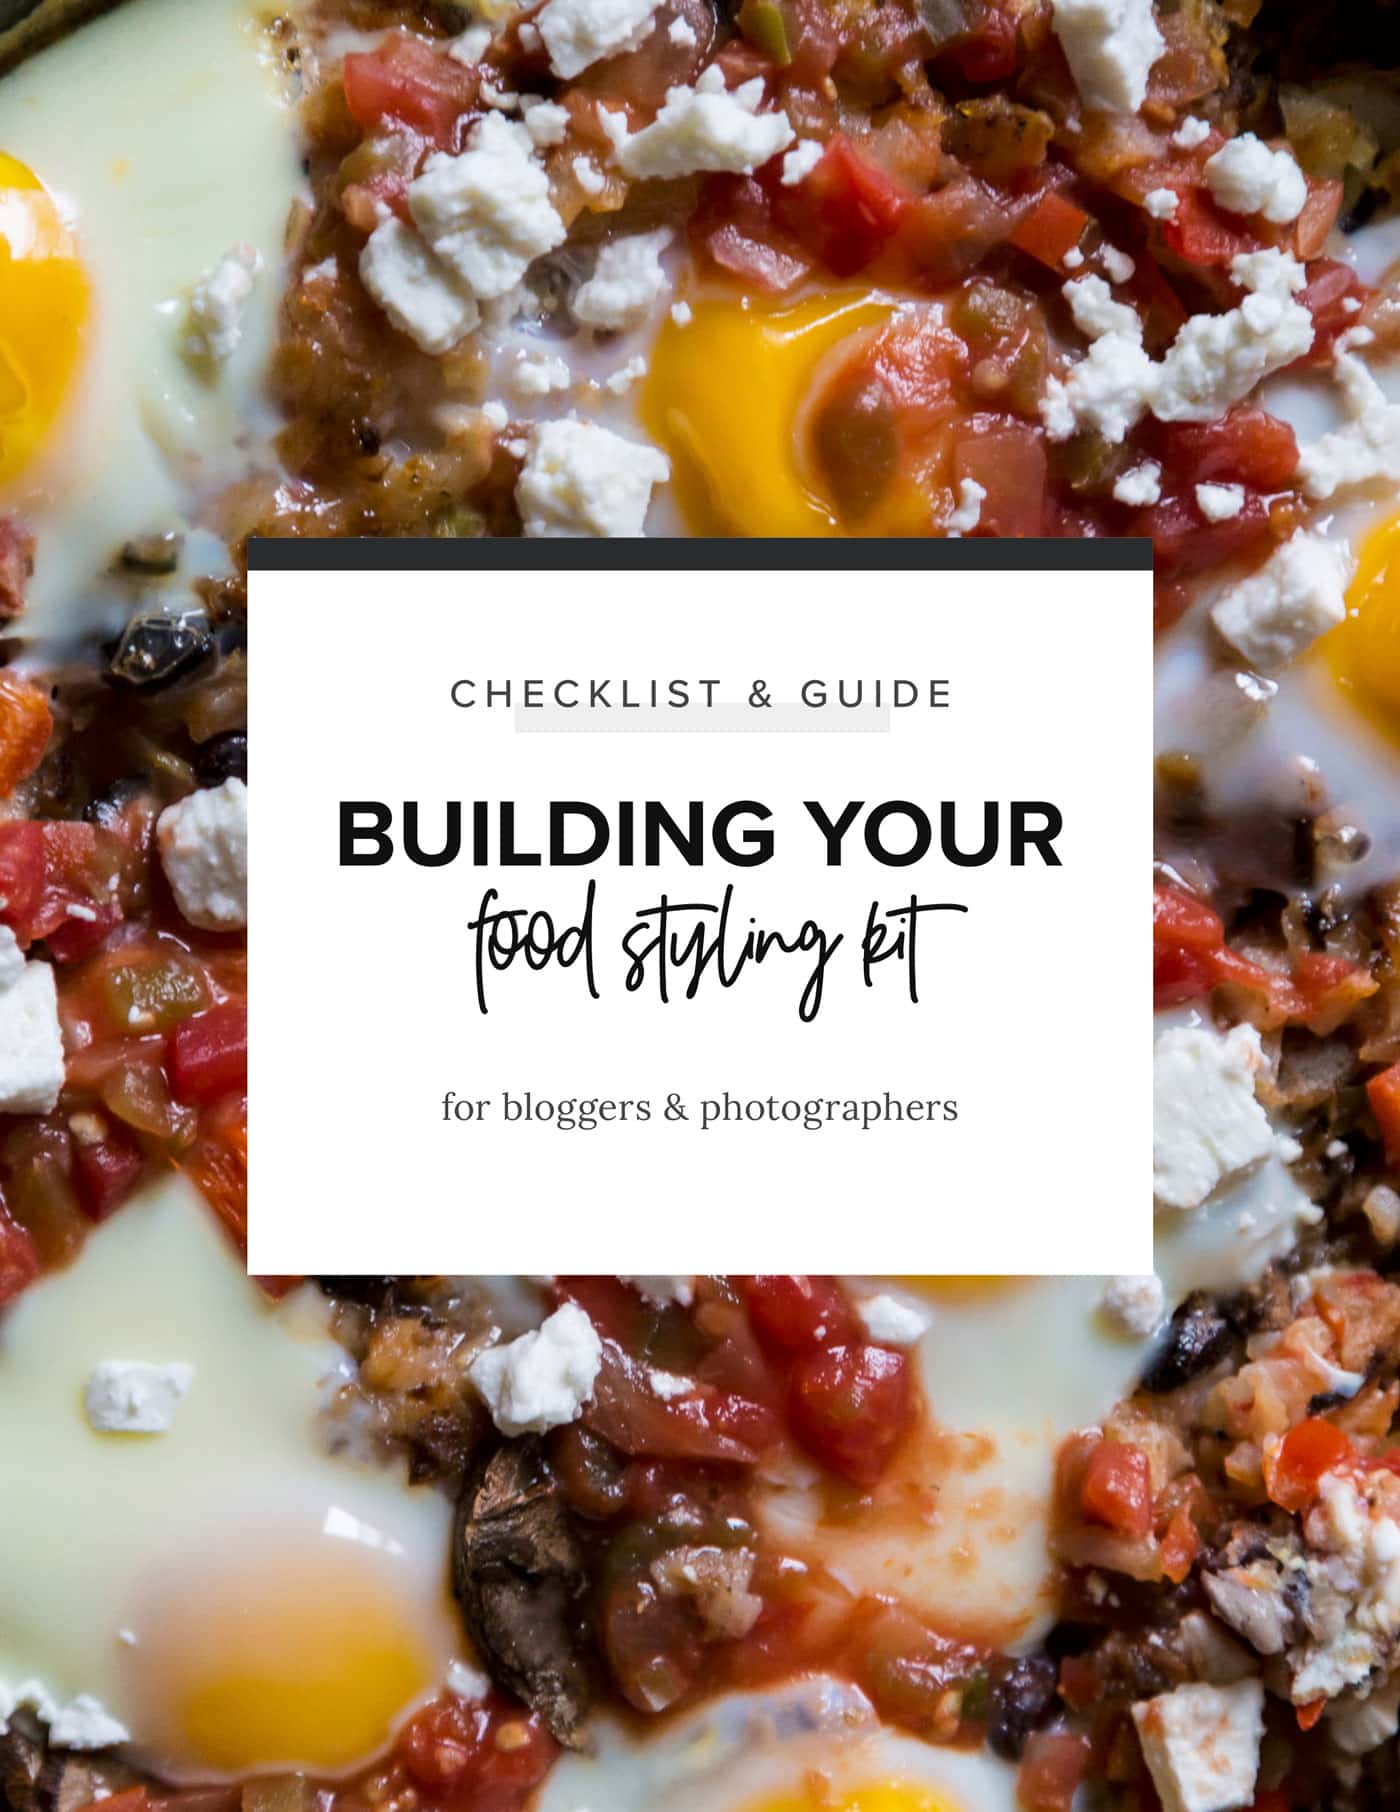 food styling kit guide and checklist